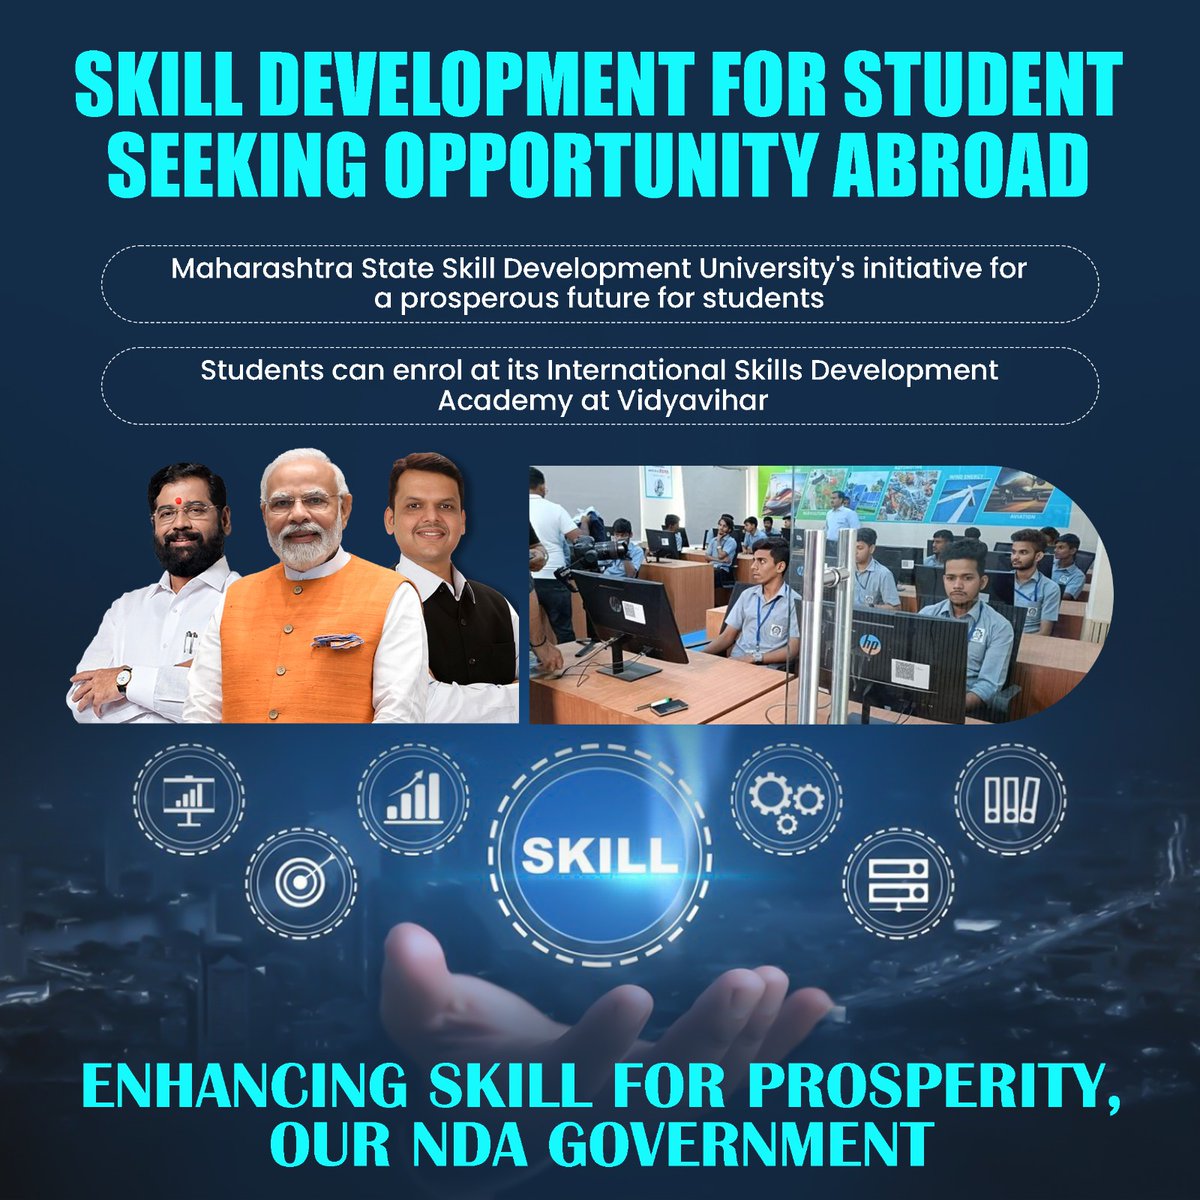 A commendable initiative by CM Eknath Shinde Govt to empower students with global skills! The State Skill University's program for skill development of students aspiring to go abroad is a testament to their commitment to youth empowerment and international opportunities.